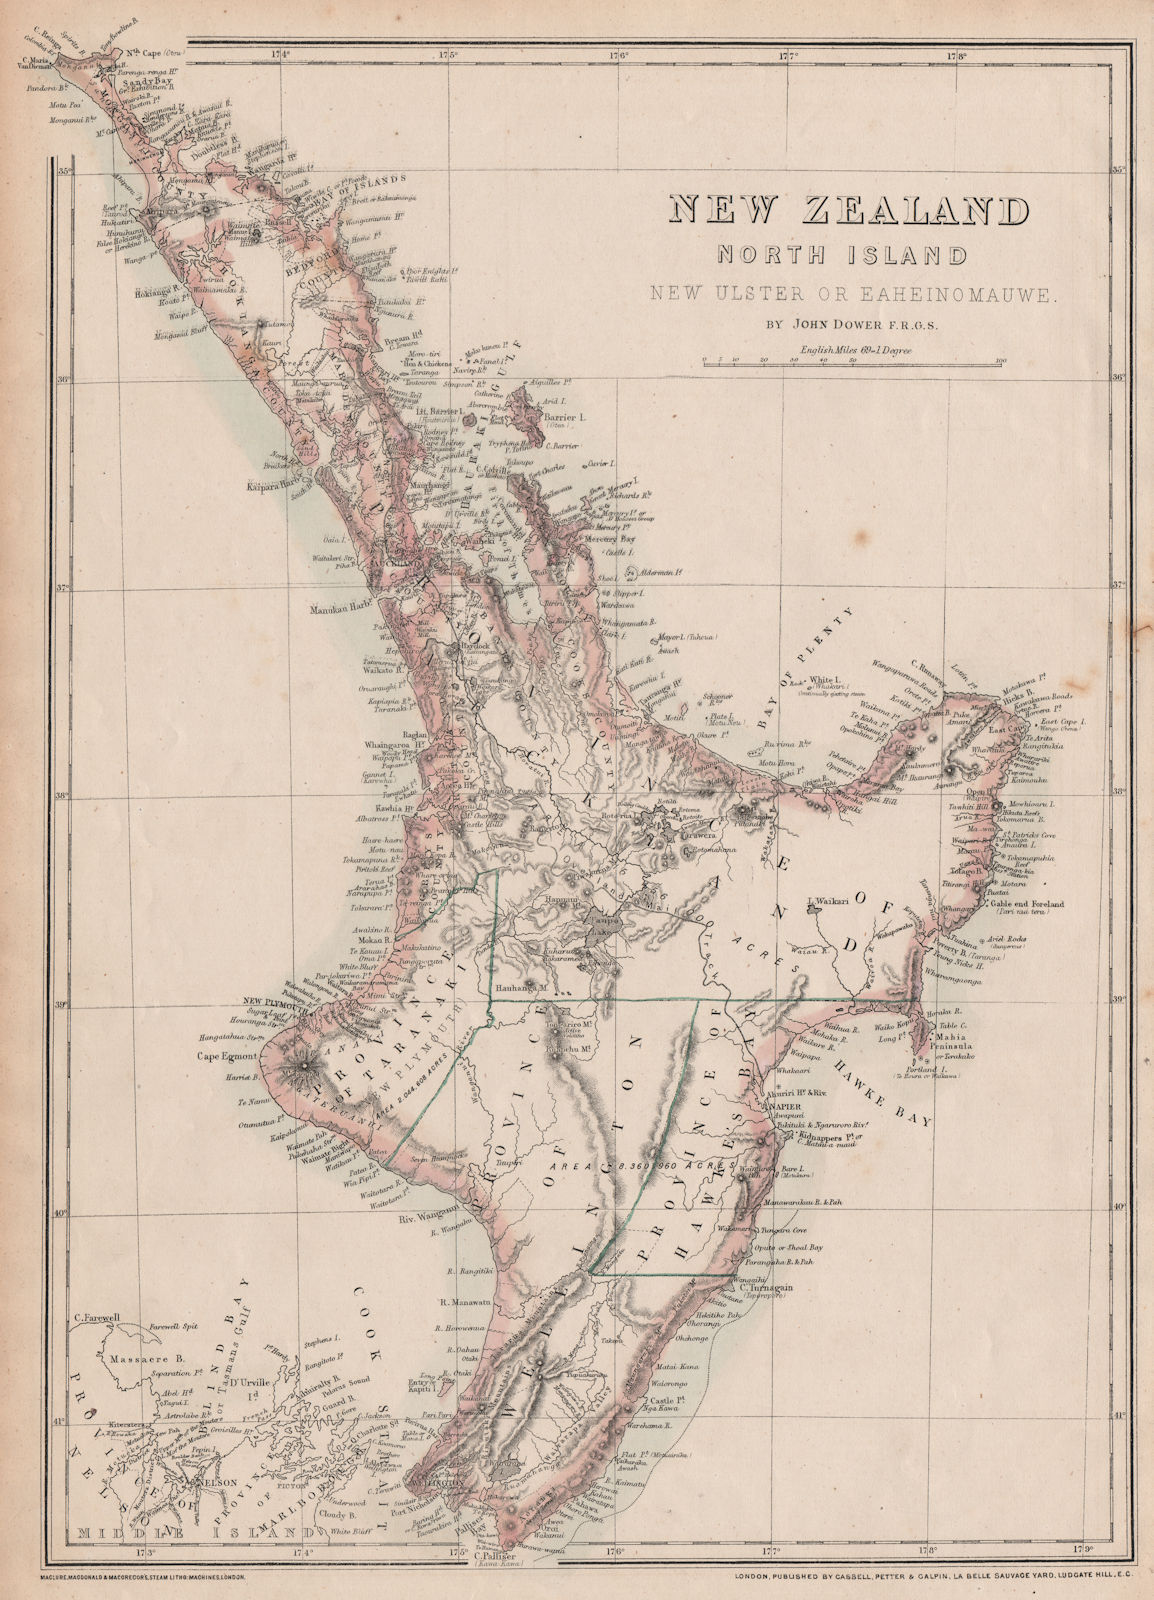 'New Zealand North Island. New Ulster or Eaheinomauwe' provinces DOWER 1863 map